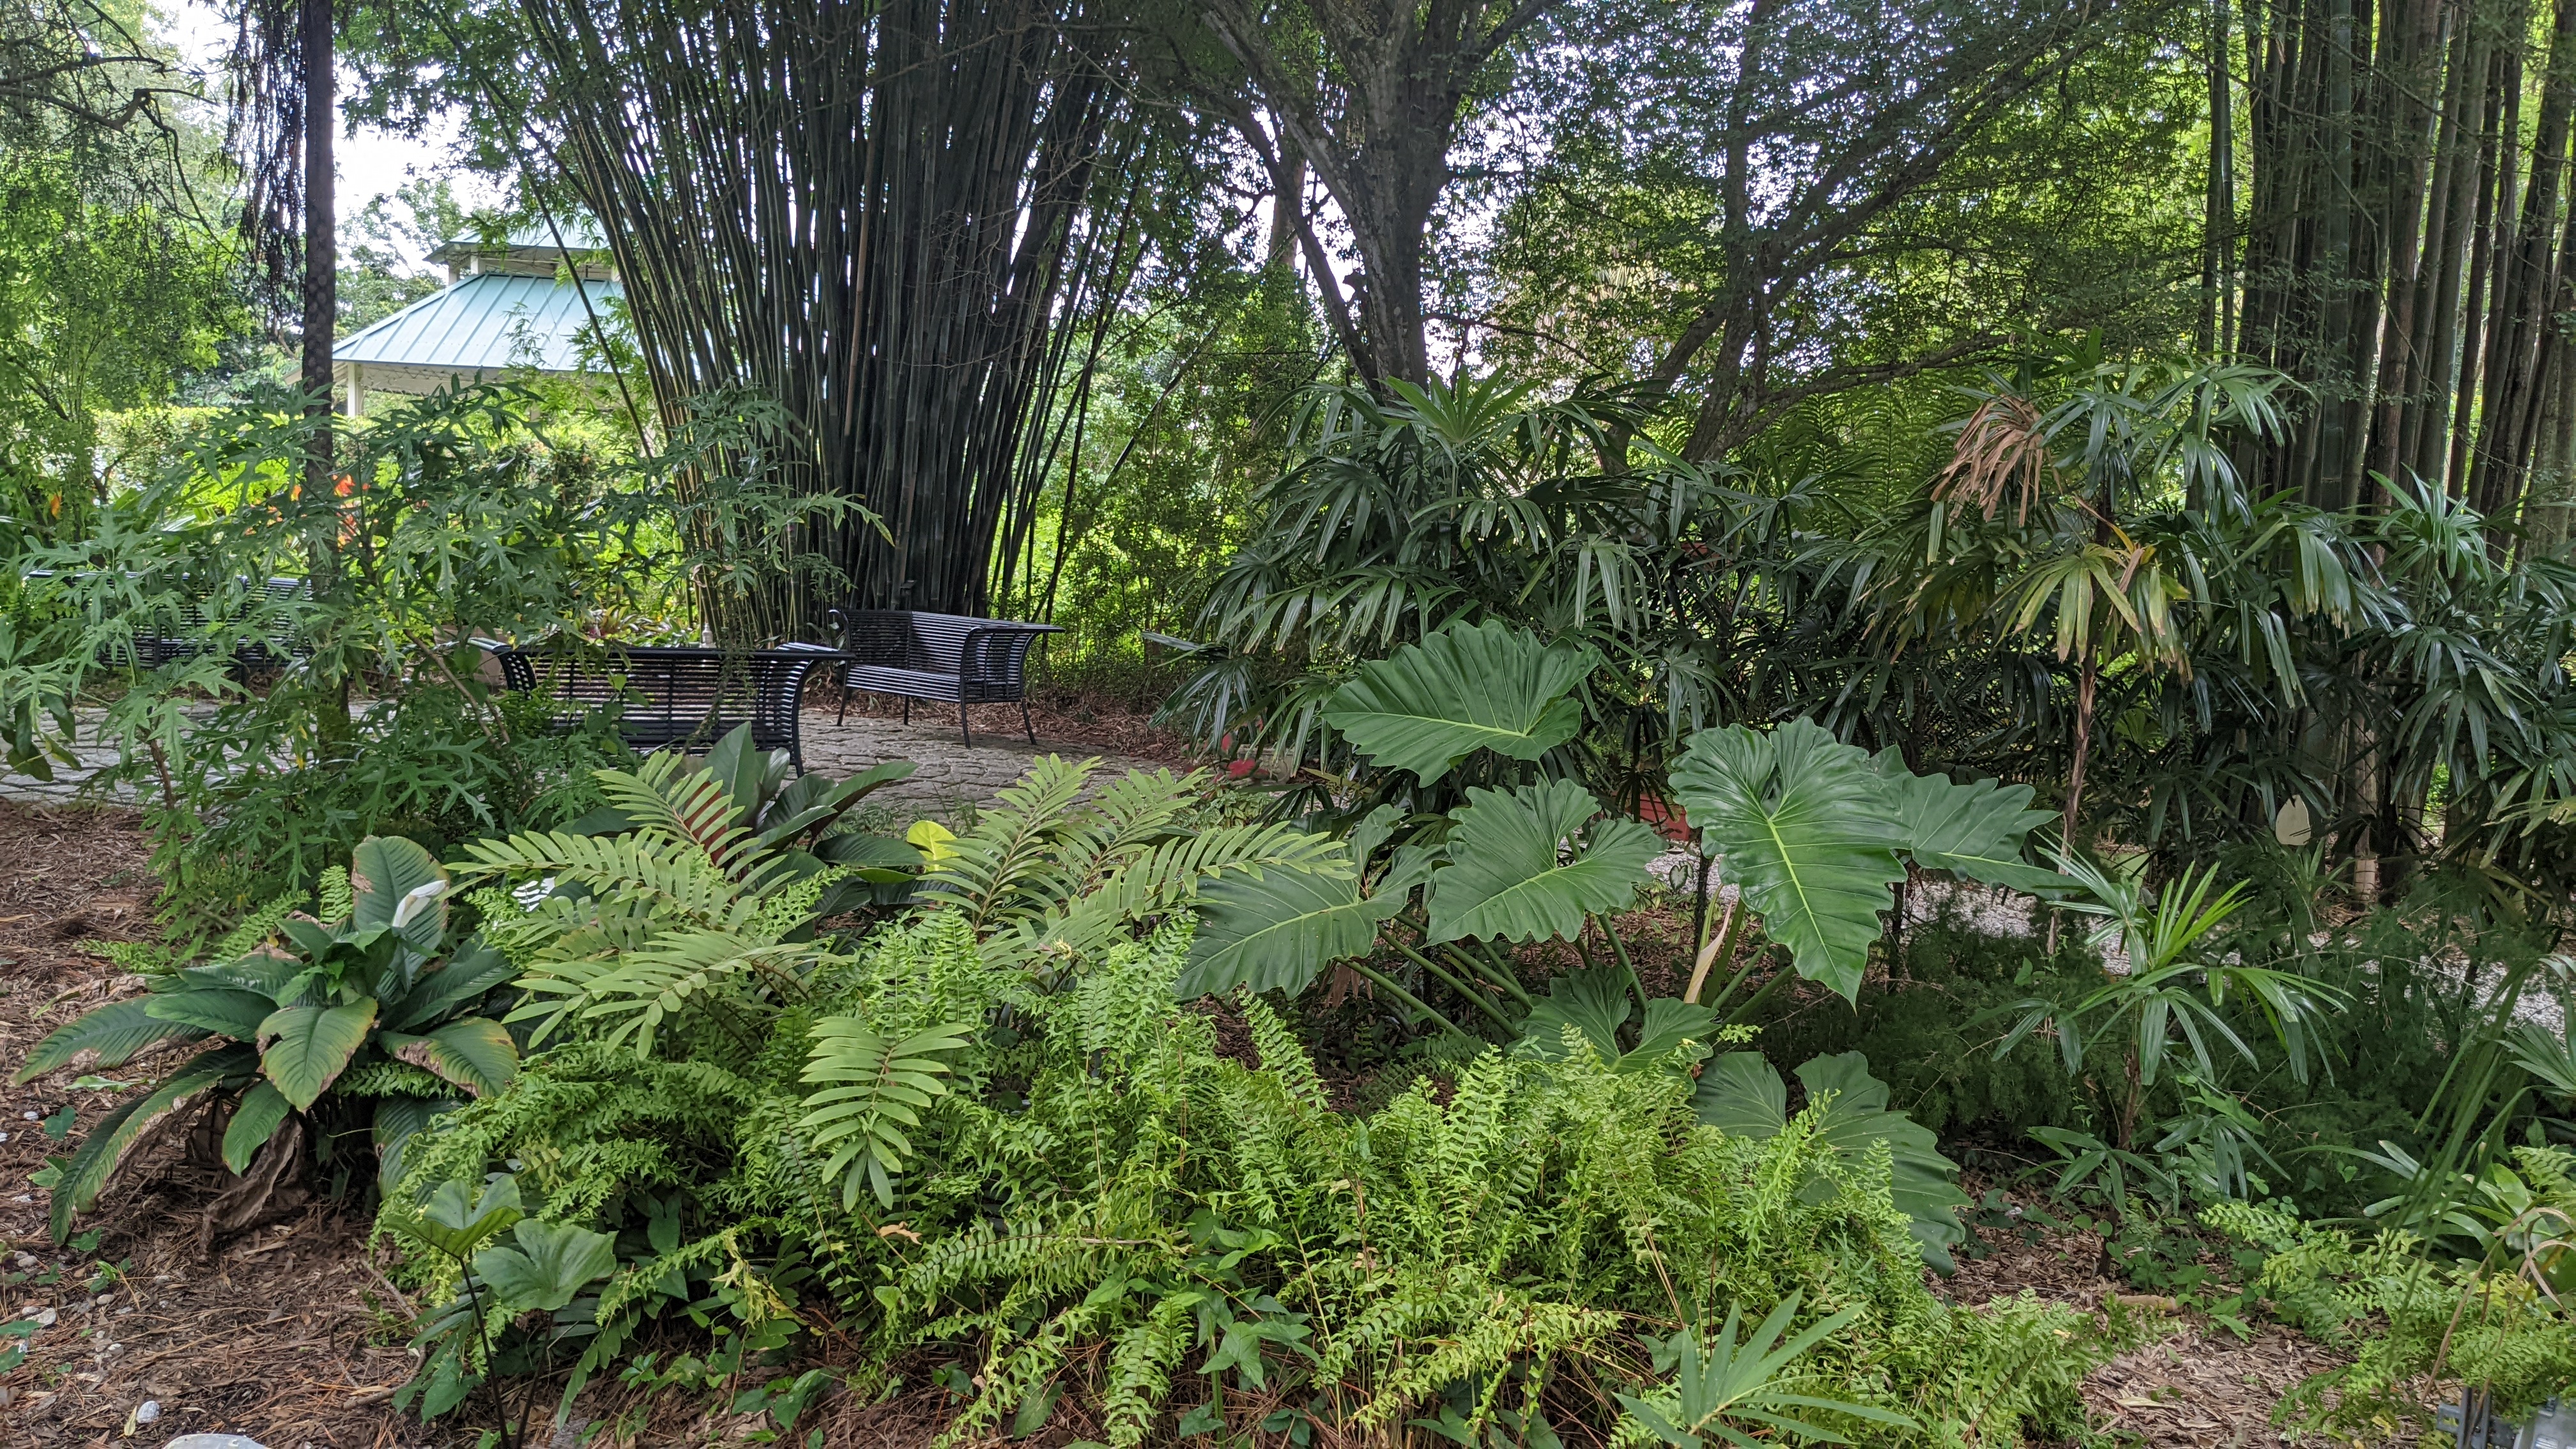 bamboo, ferns, alocasia stream, lady palm and bridge looking into meditation area